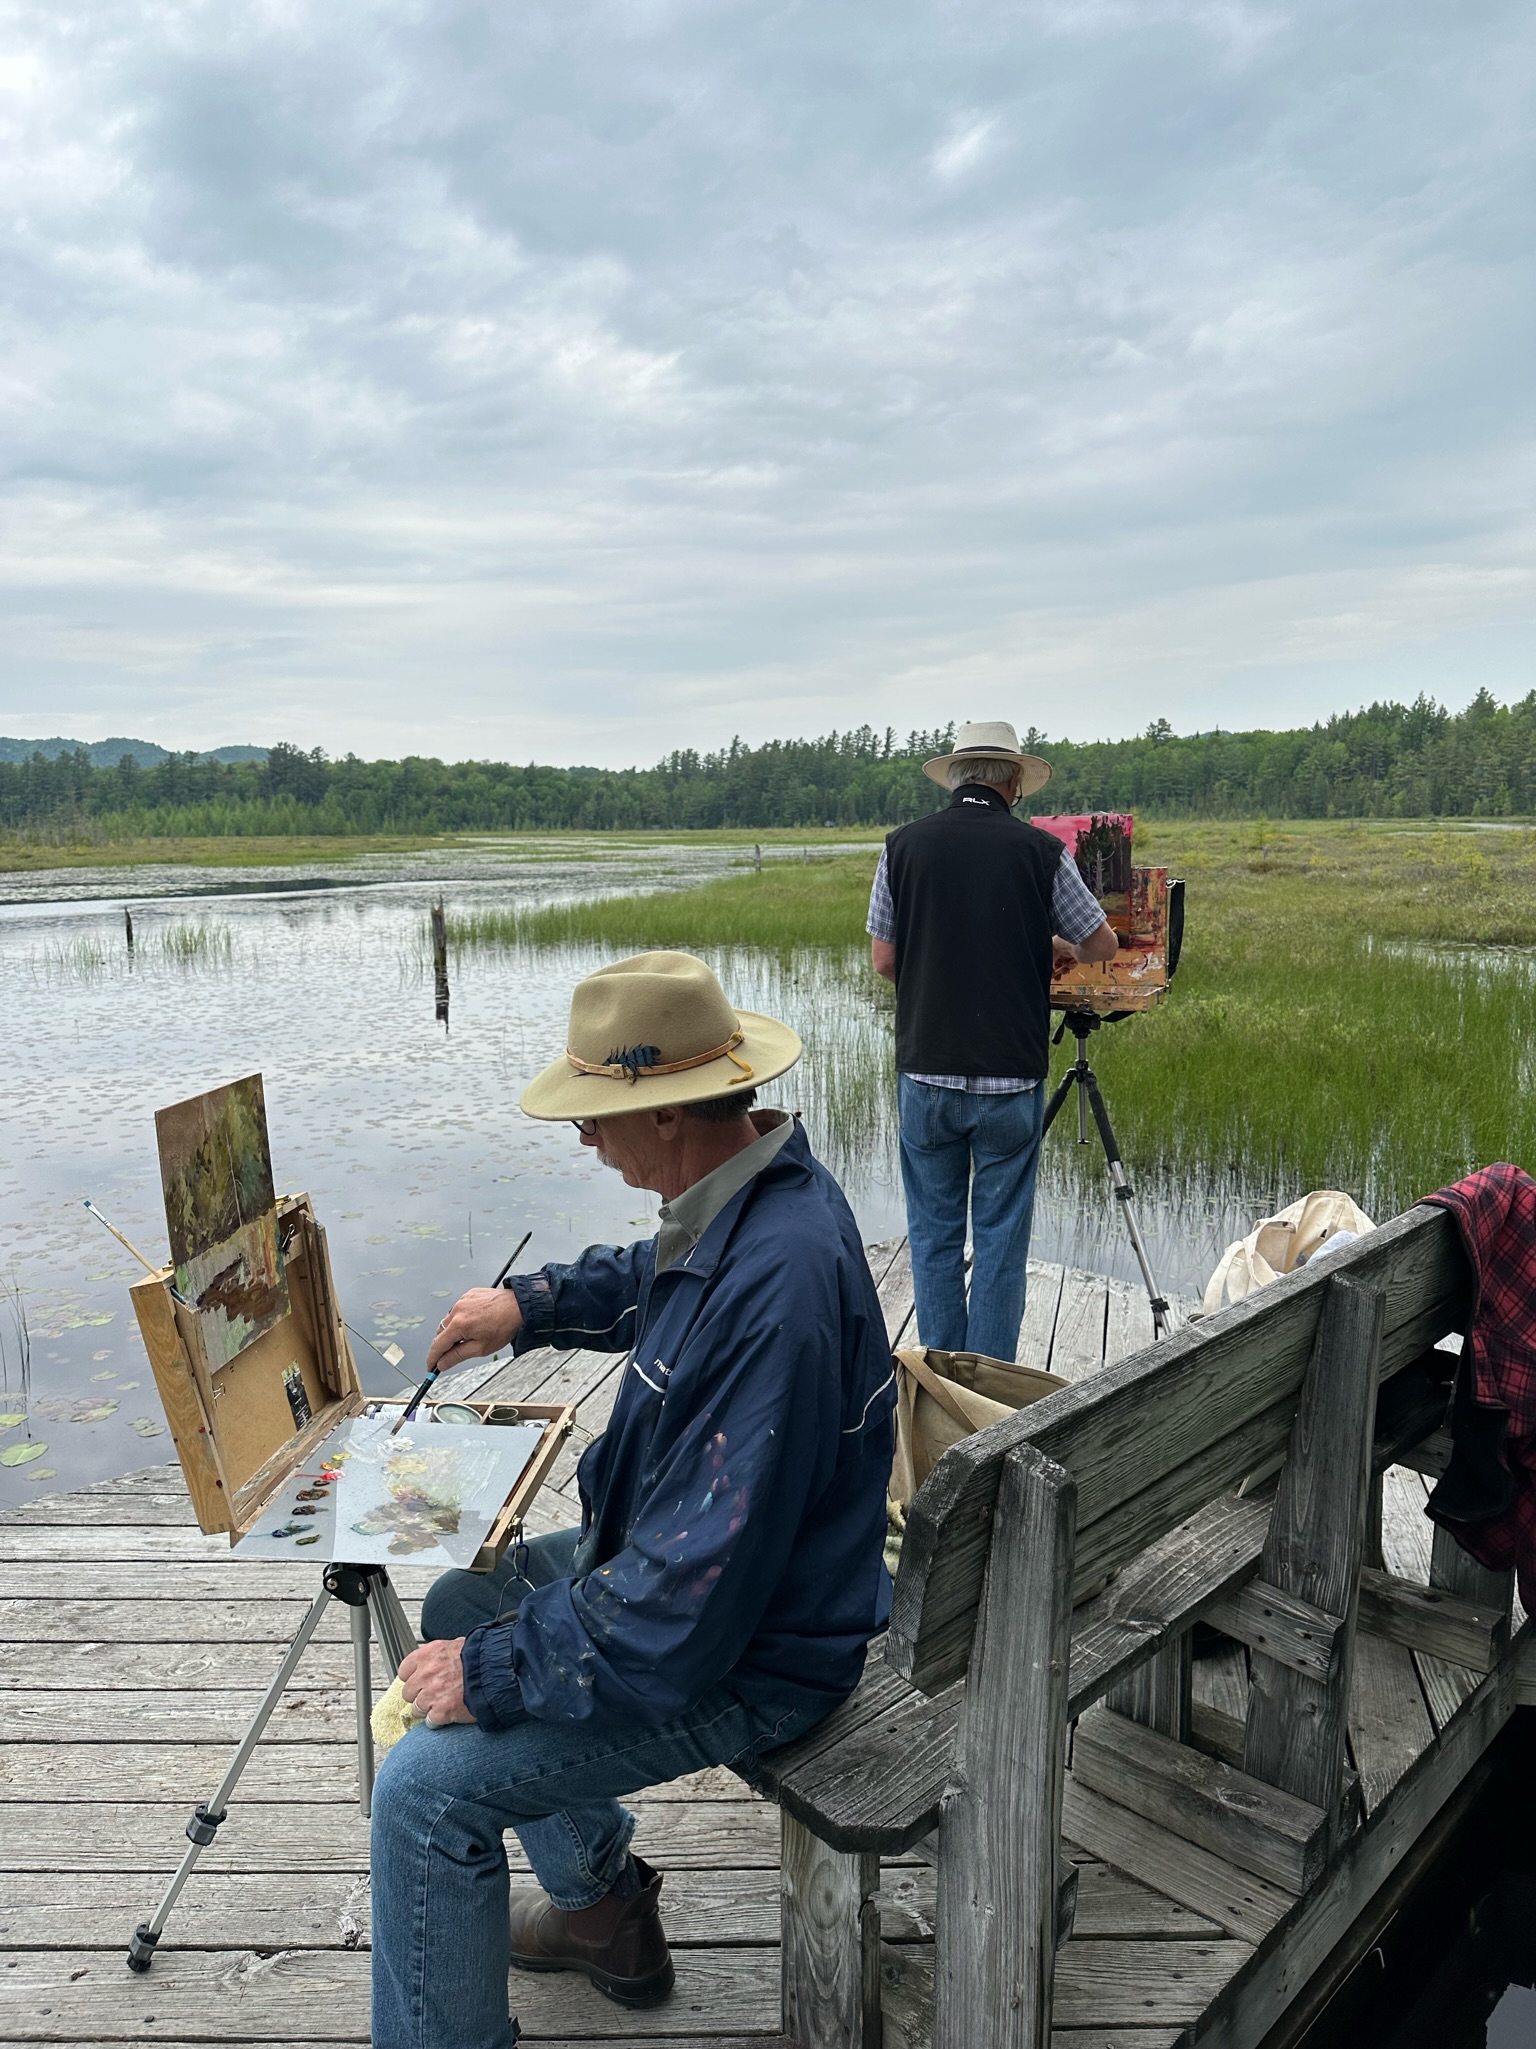 The Publisher’s Invitational is the perfect way to paint somewhere beautiful AND make new friends in the plein air art community.